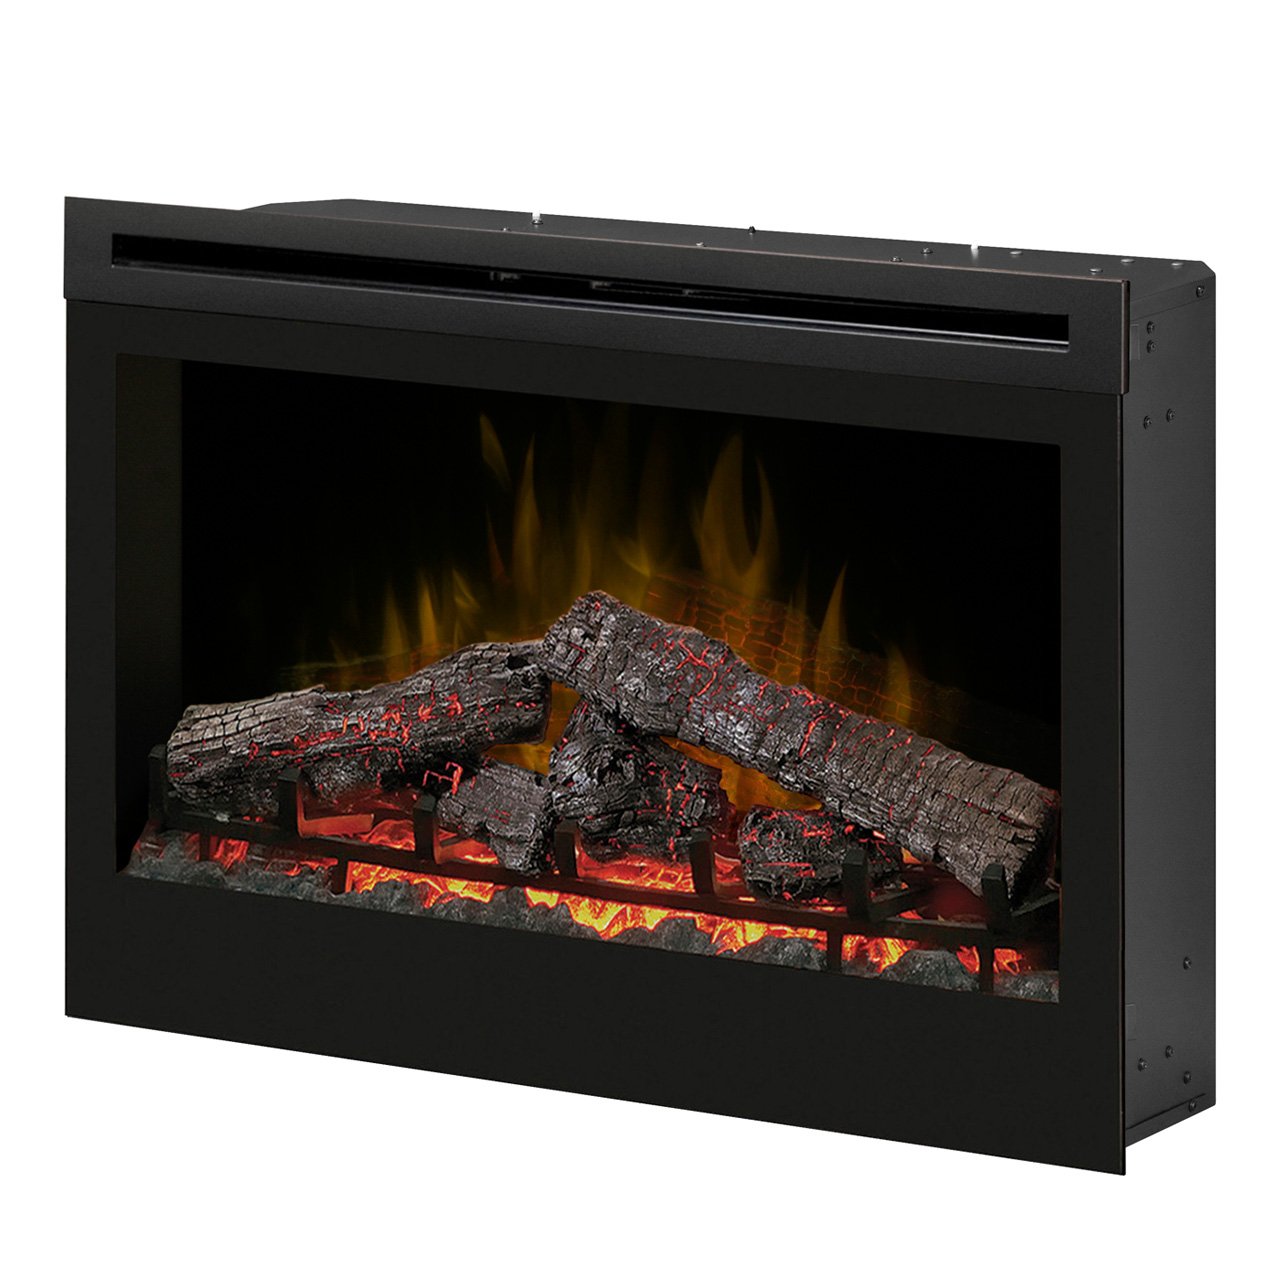 Fireplaces and More Best Of Dimplex Df3033st 33 Inch Self Trimming Electric Fireplace Insert